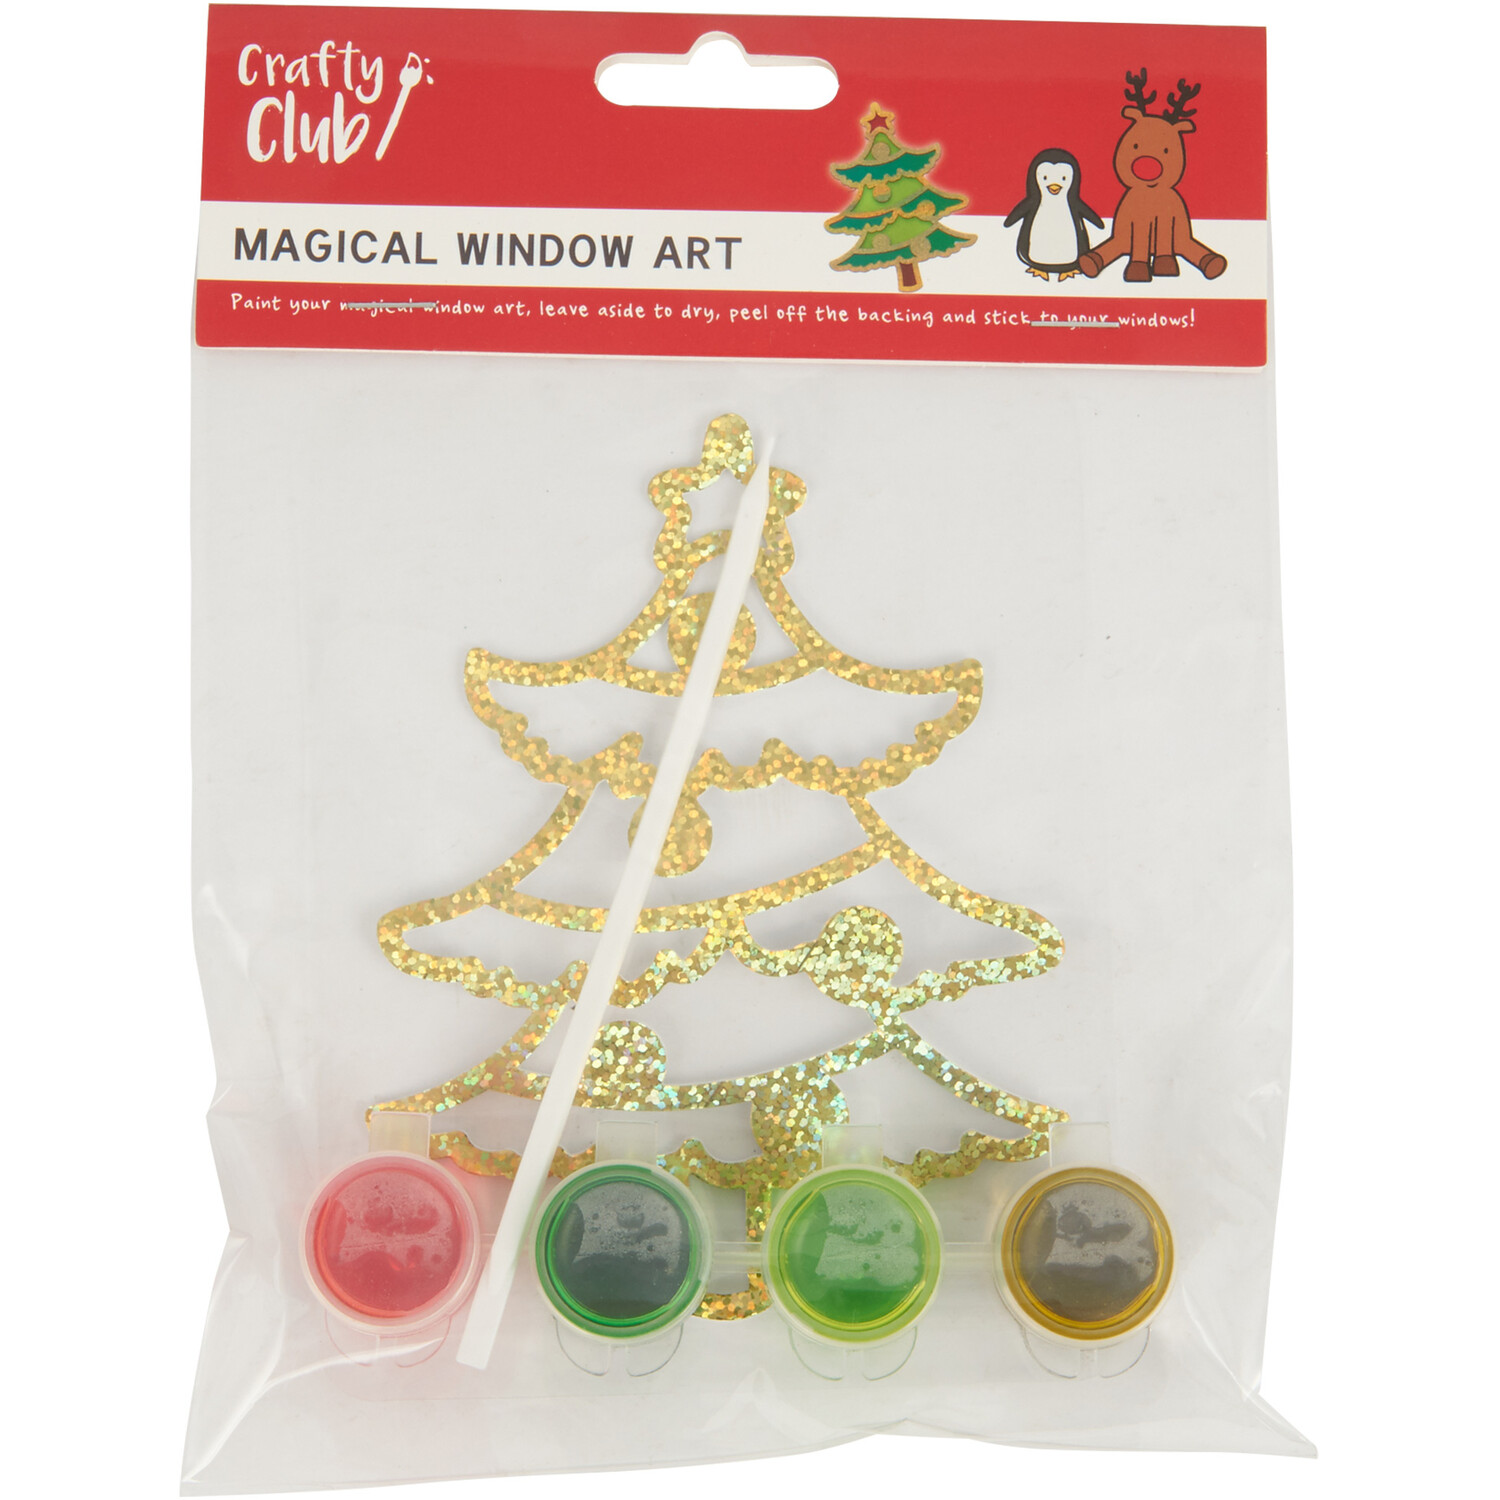 Single Crafty Club Magical Window Art Set in Assorted styles Image 1